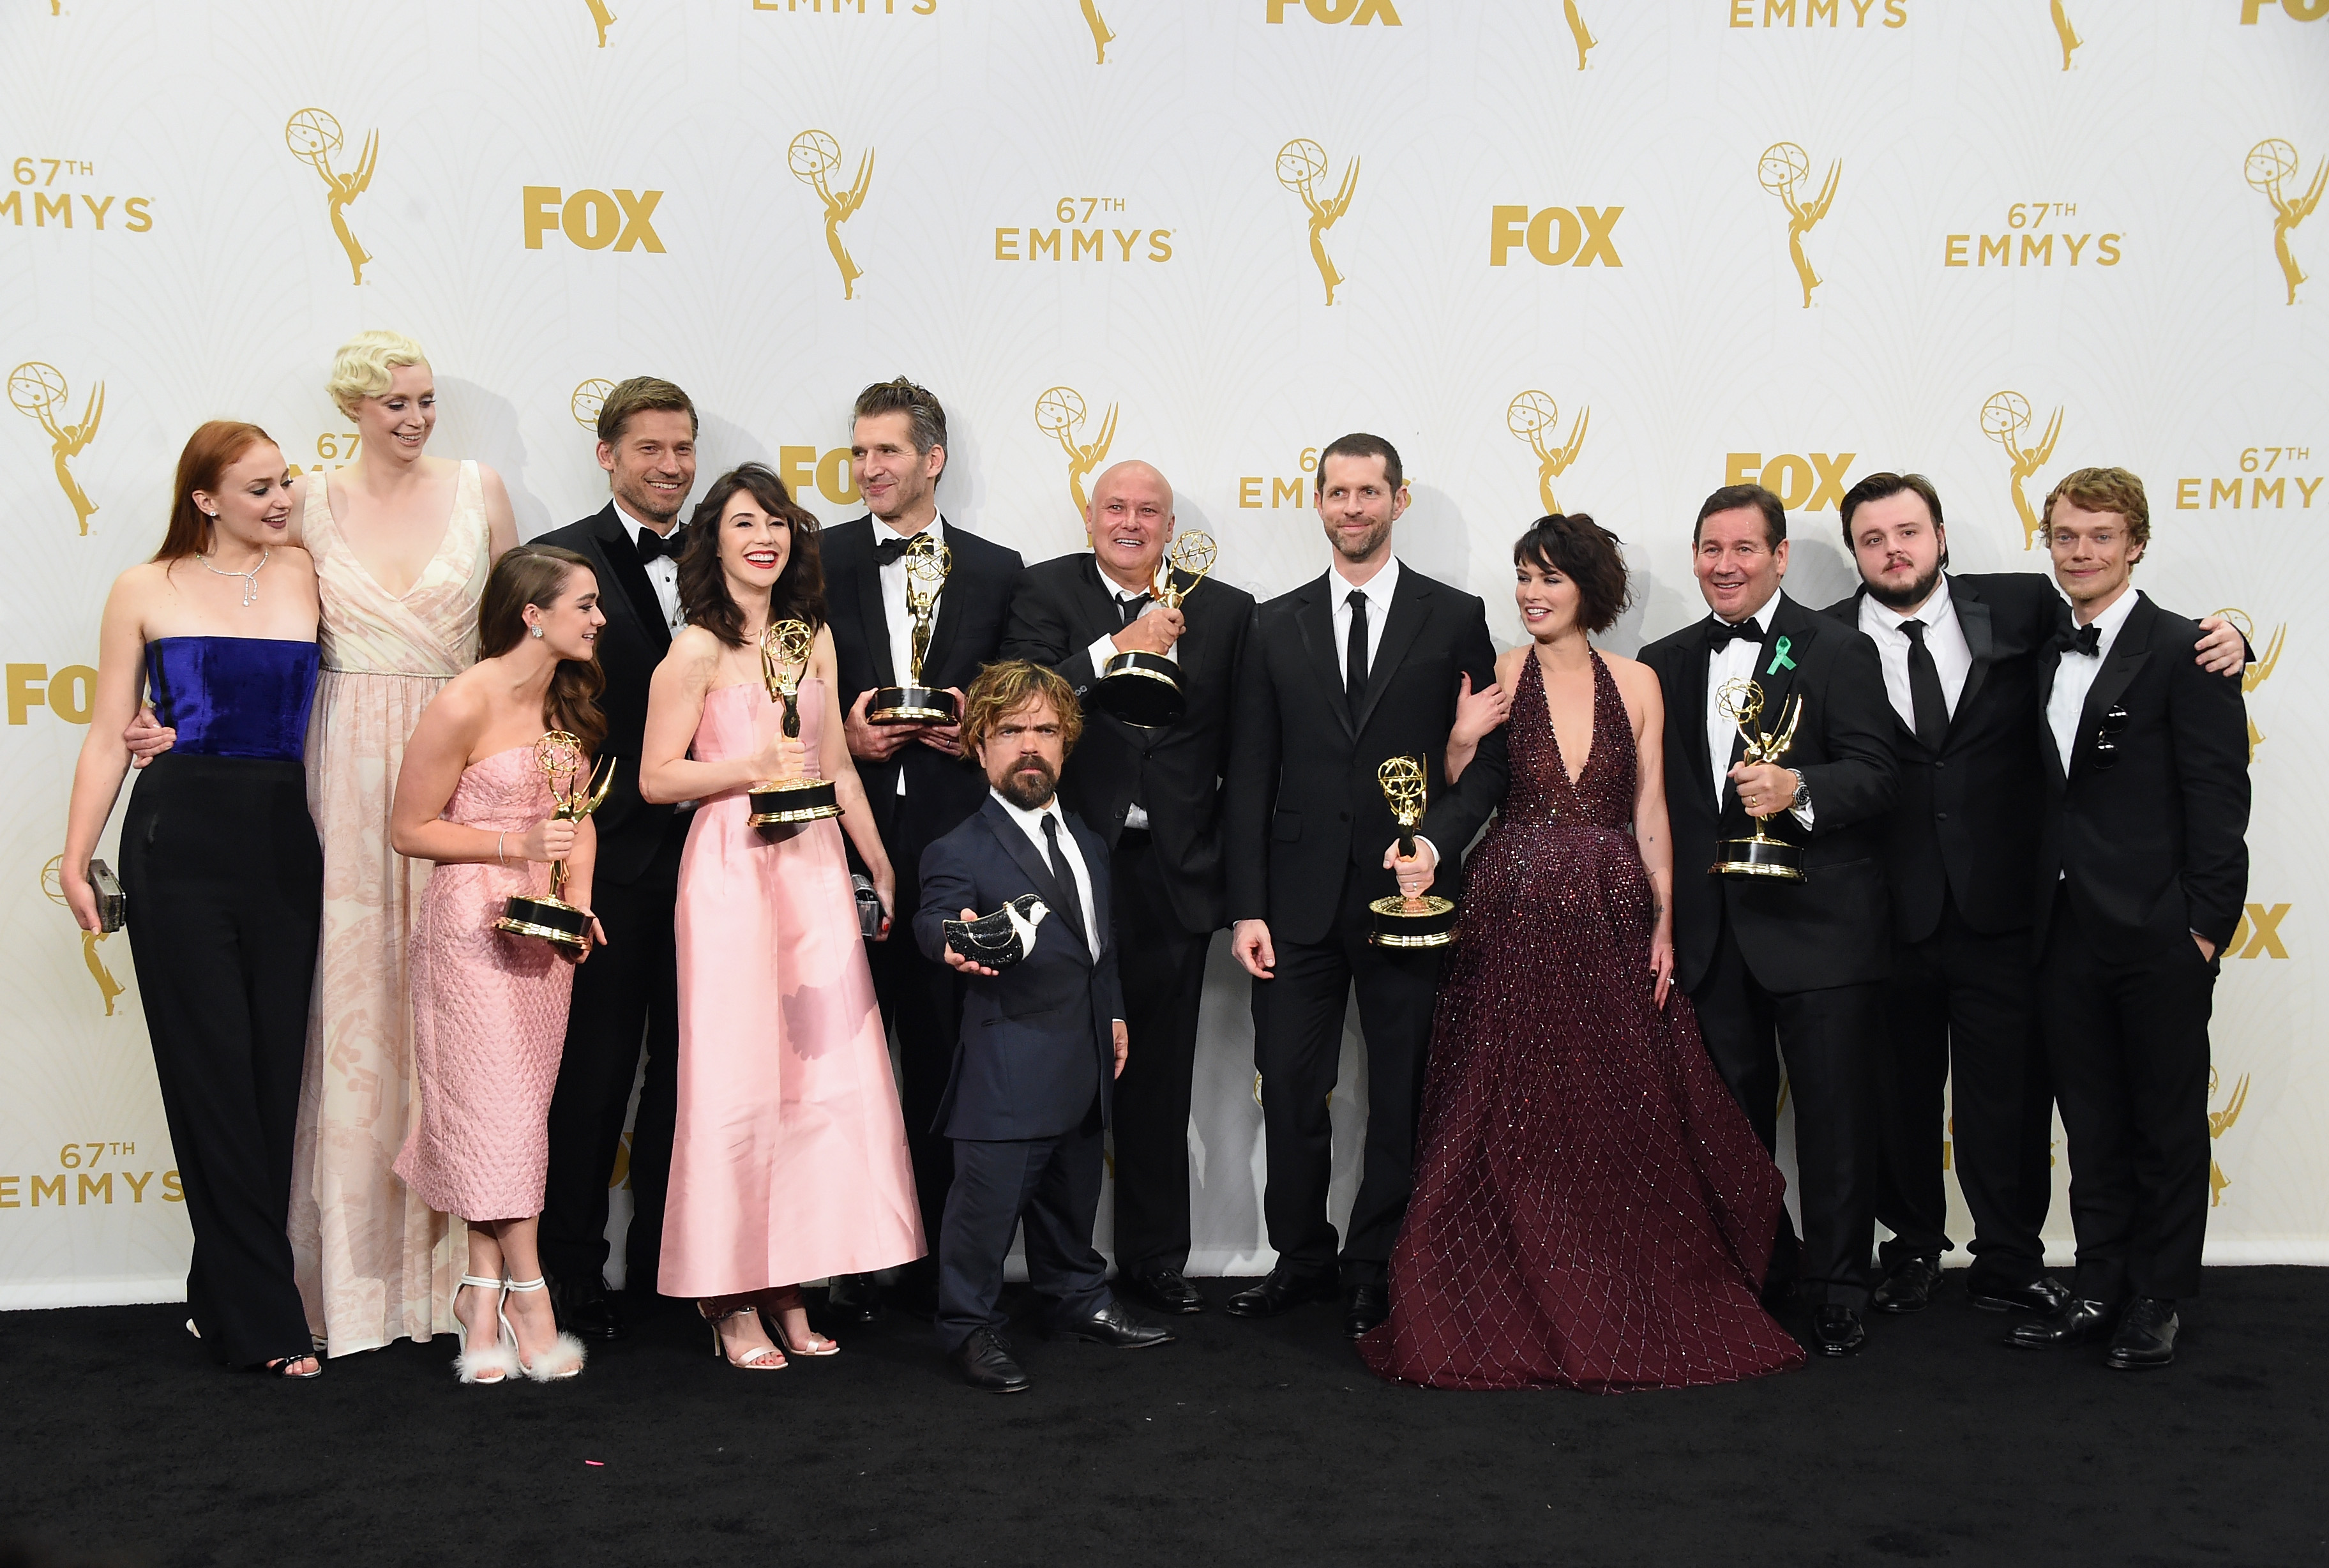 LOS ANGELES, CA - SEPTEMBER 20: (L-R) Actors Sophie Turner, Gwendoline Christie, Maisie Williams, Nikolaj Coster-Waldau, Carice van Houten, writer David Benioff, actor Peter Dinklage, Conleth Hill, writer D. B. Weiss, Lena Headey, director David Nutter and actors John Bradley-West and Alfie Allen, winners of Outstanding Drama Series for "Game of Thrones", pose in the press room at the 67th Annual Primetime Emmy Awards at Microsoft Theater on September 20, 2015 in Los Angeles, California.   Jason Merritt/Getty Images/AFP